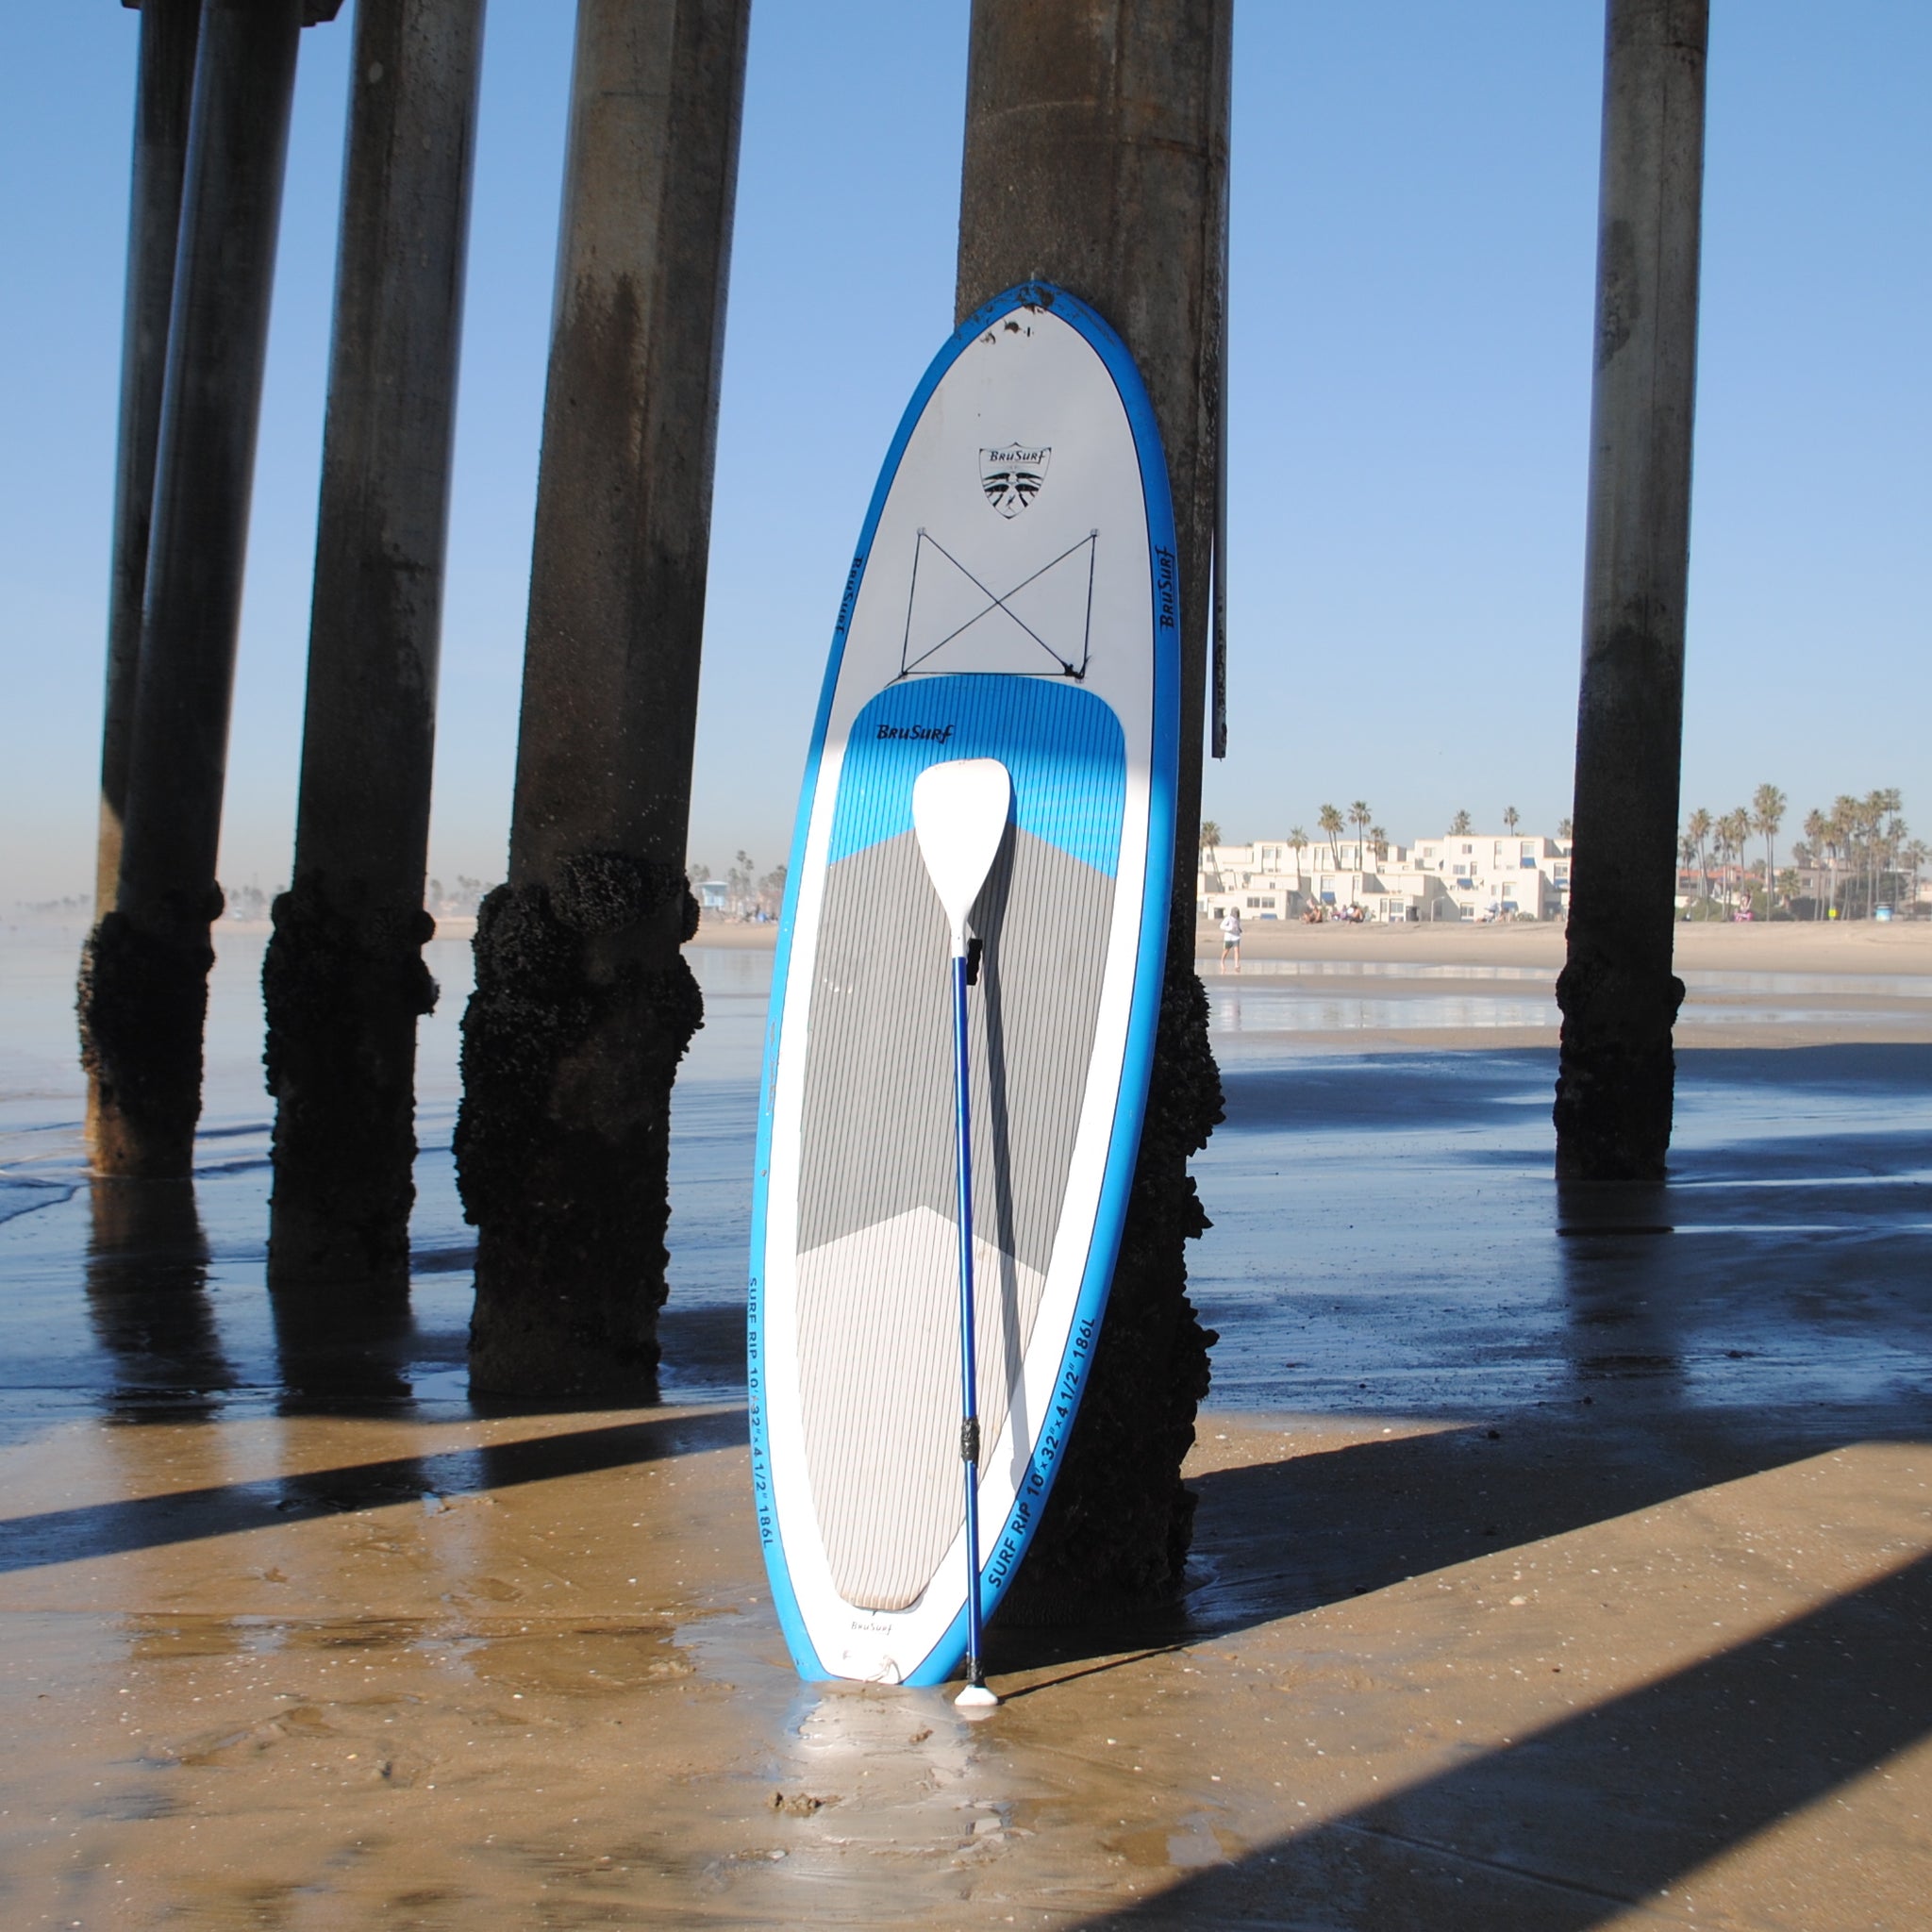 Stand-up Paddleboard Rentals in Surf City (Huntington Beach